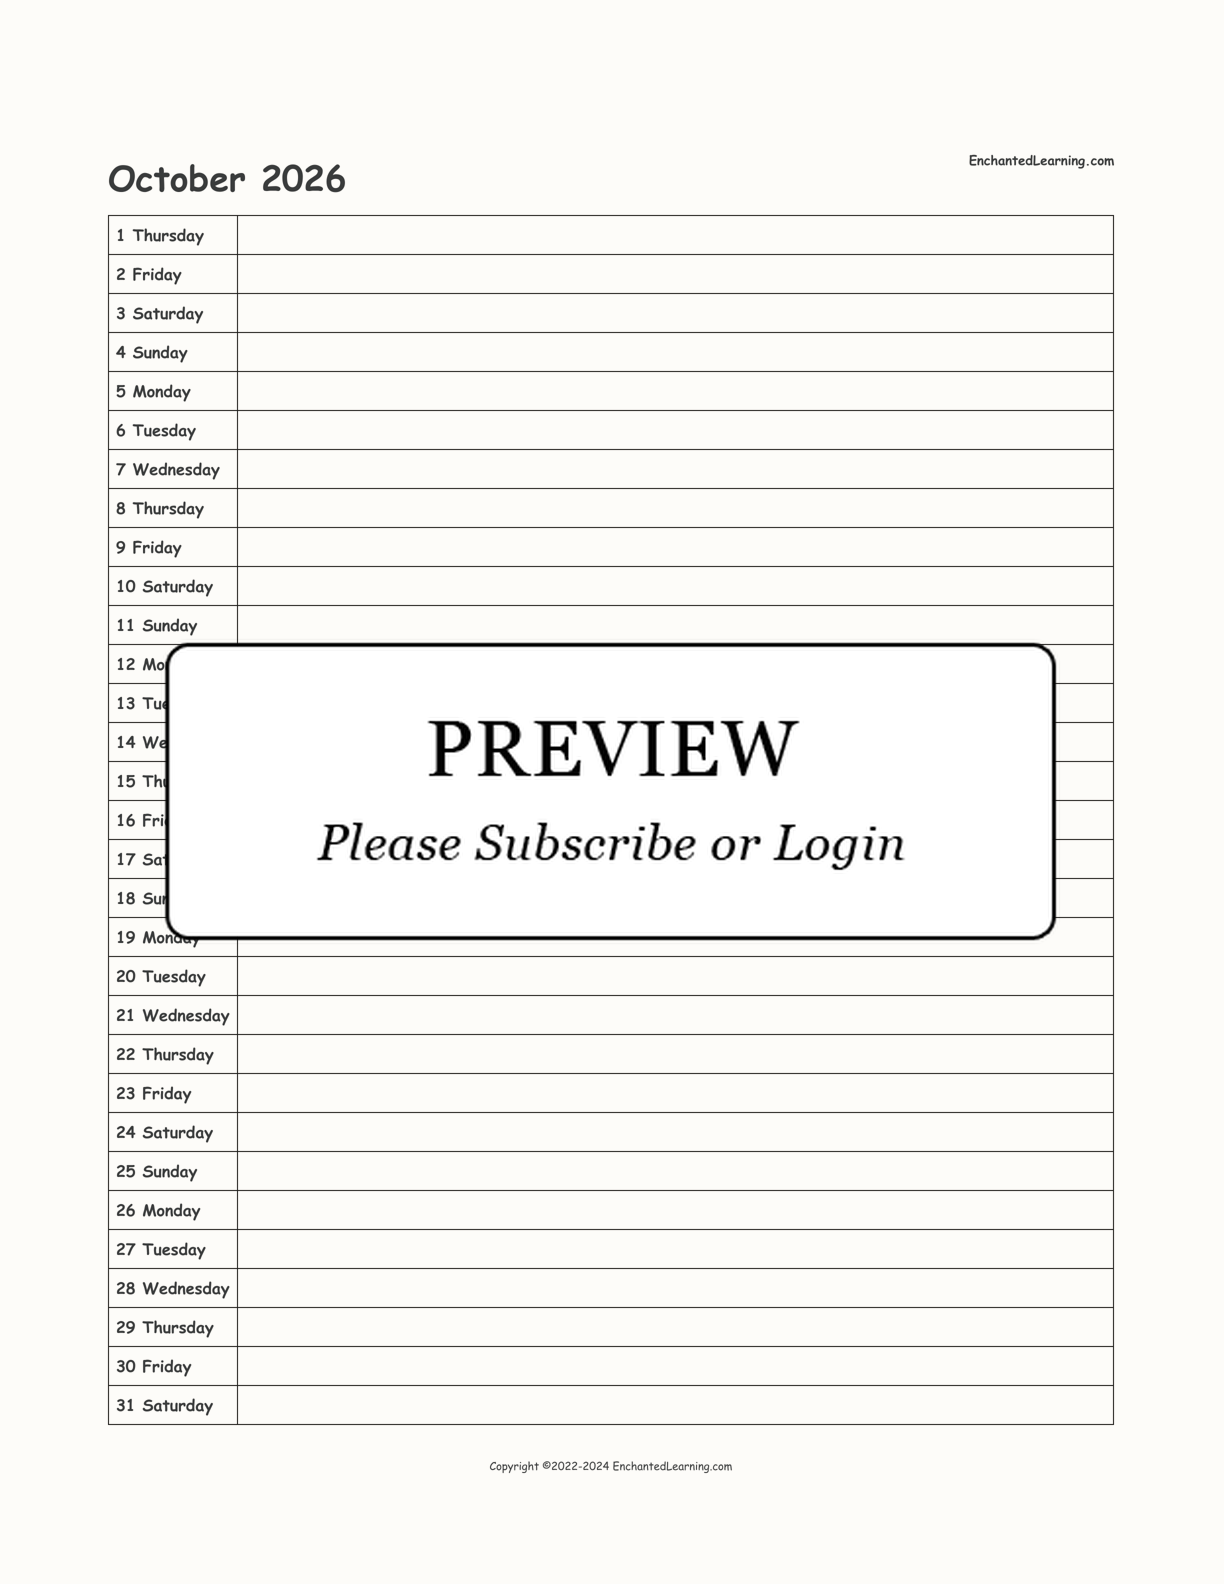 2026 Scheduling Calendar interactive printout page 10